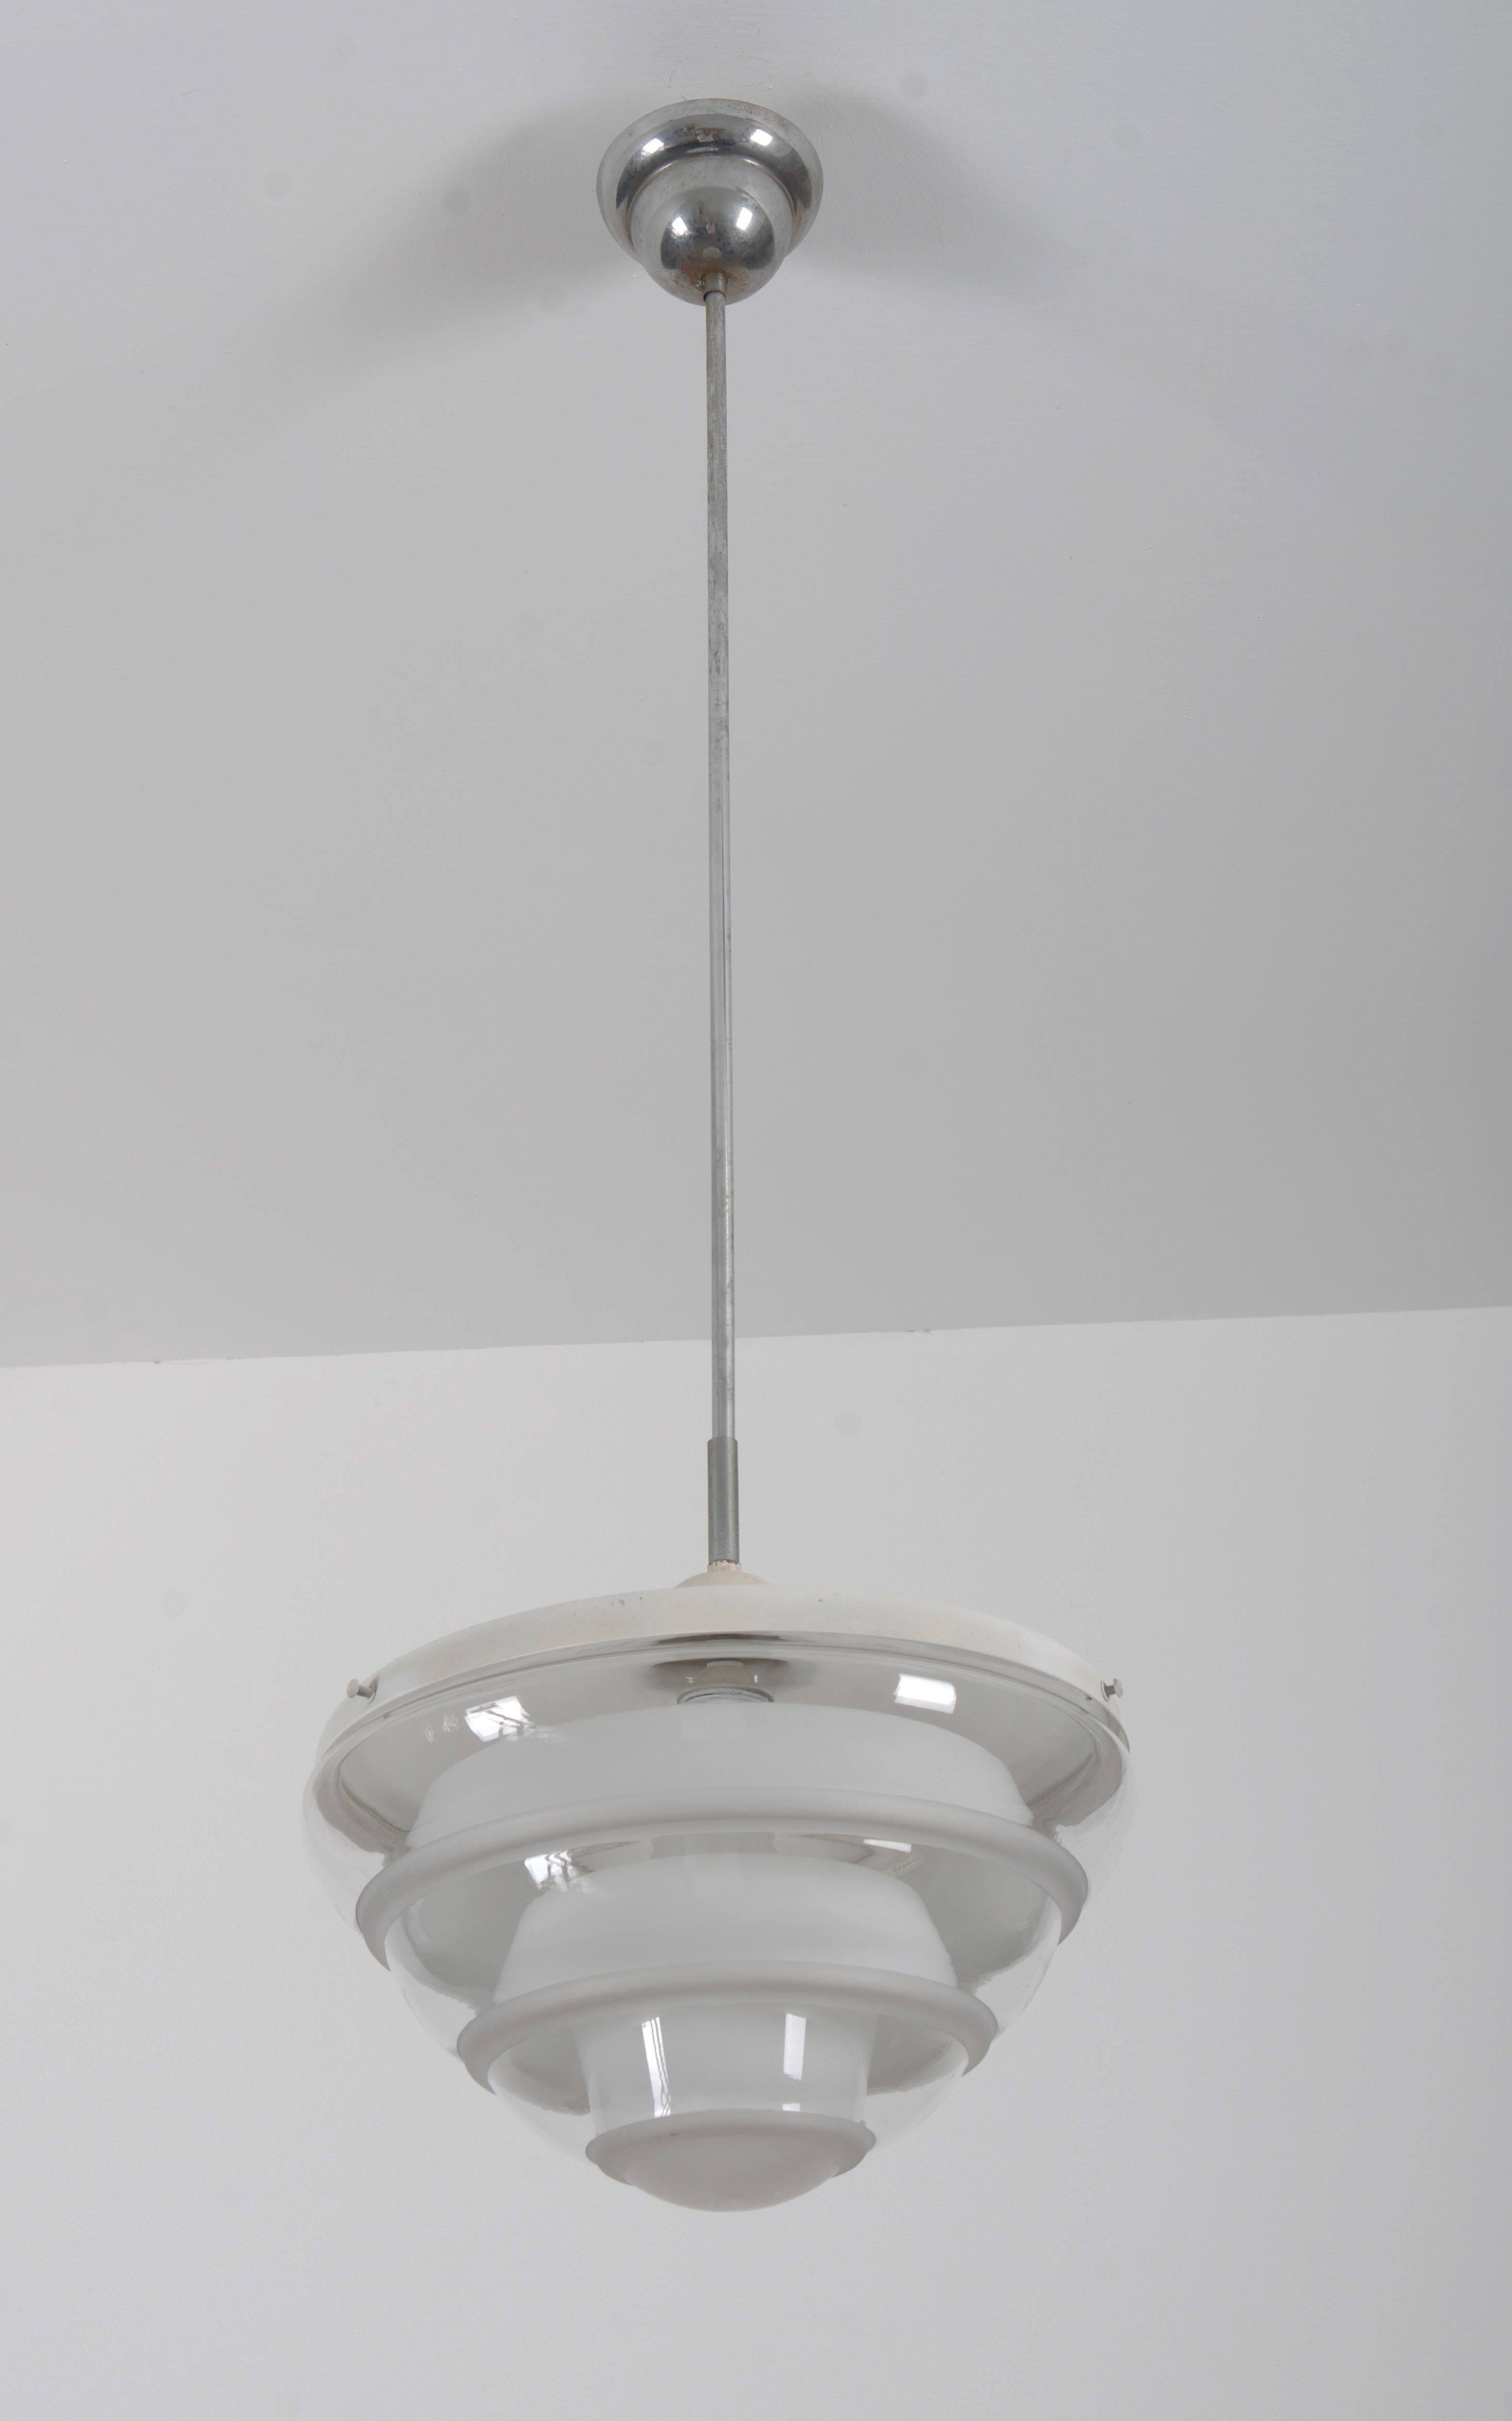 Opaline glass top with clear hemispherical buttom shade glass, frosted glass rings inside and steel fixing parts, designed by Karl Gustaf Lindesvärd in the 1930s for KG-Armaturen in Malmö Sveden. Fitted with E27 socket up to 100W. Up to 5 pieces